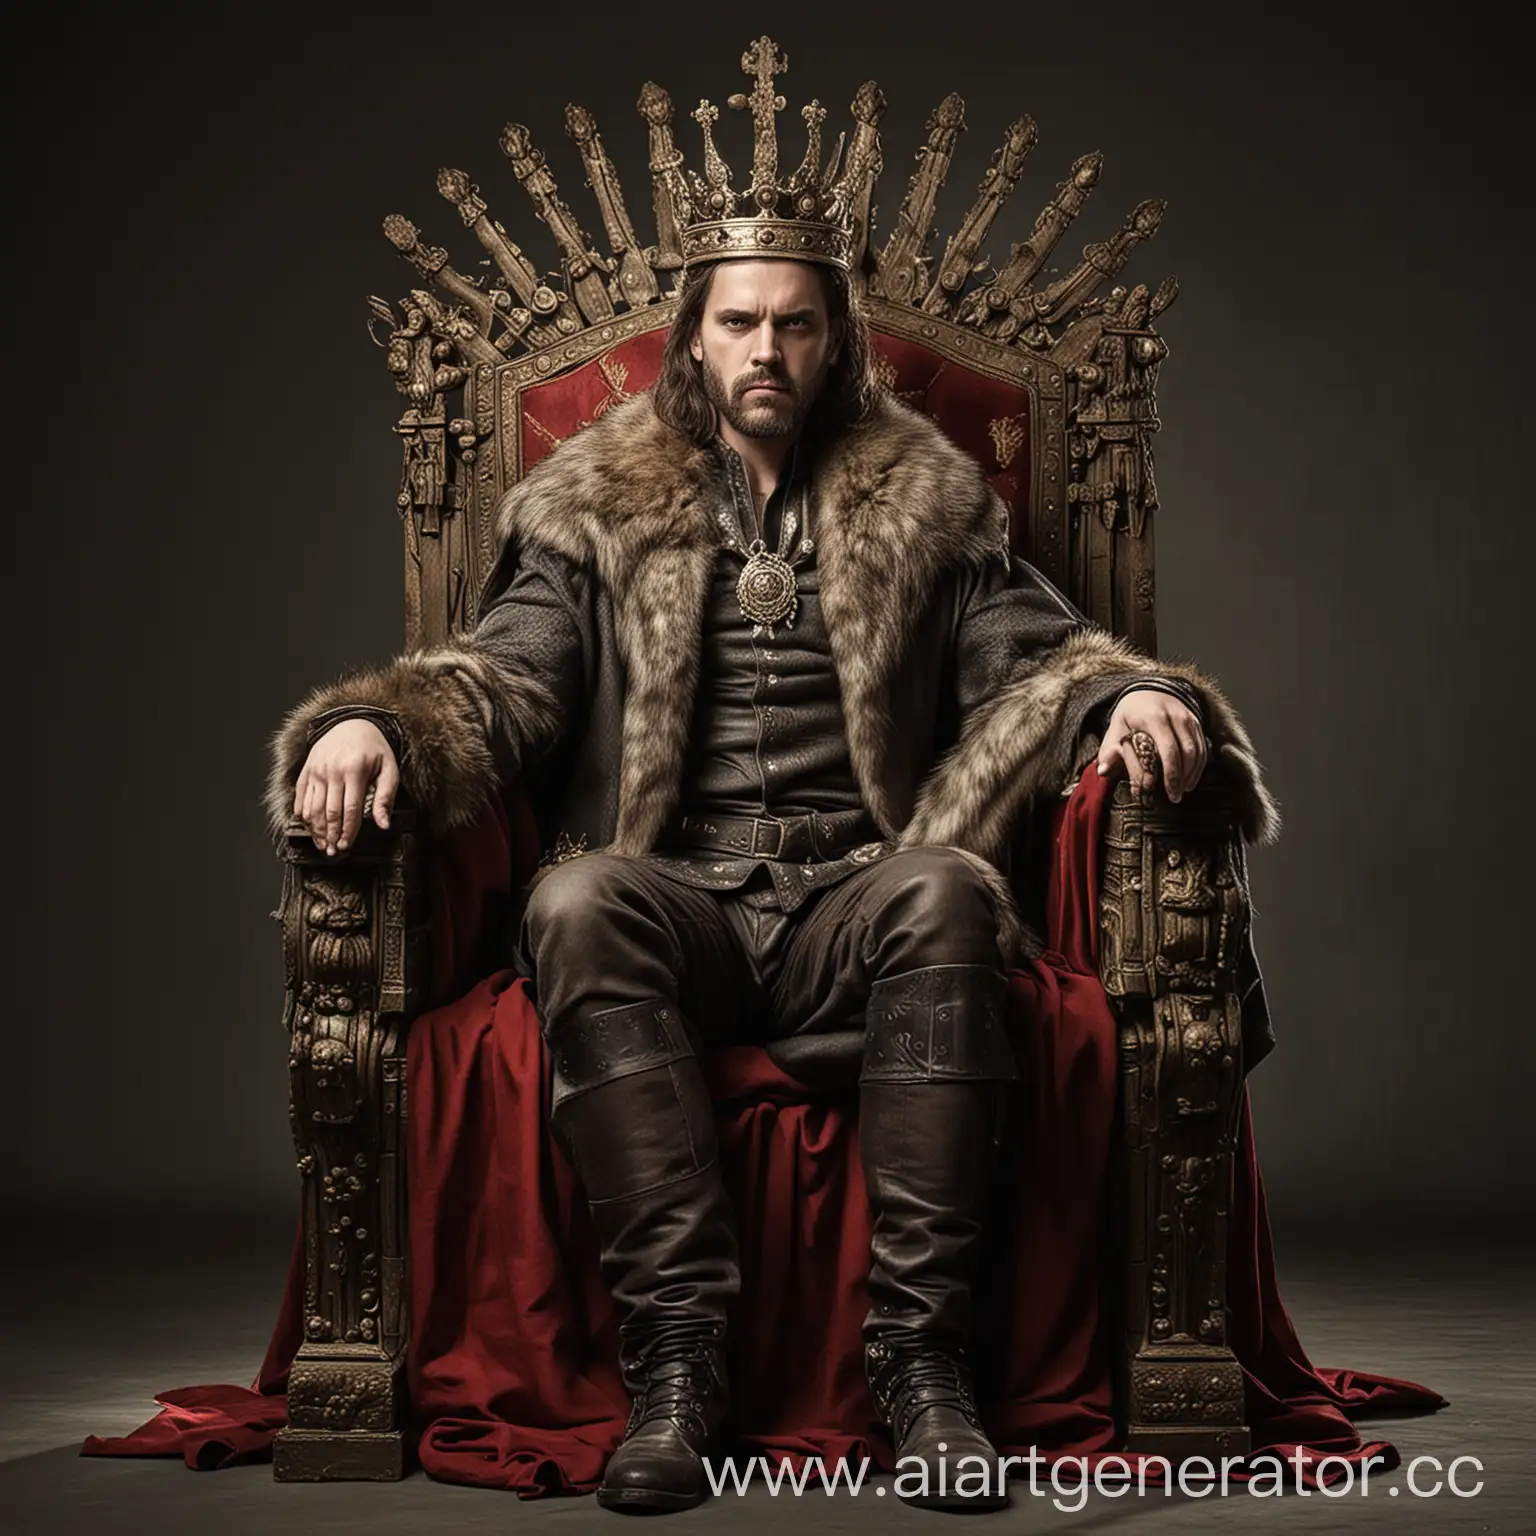 Regal-Monarch-Seated-on-Ornate-Throne